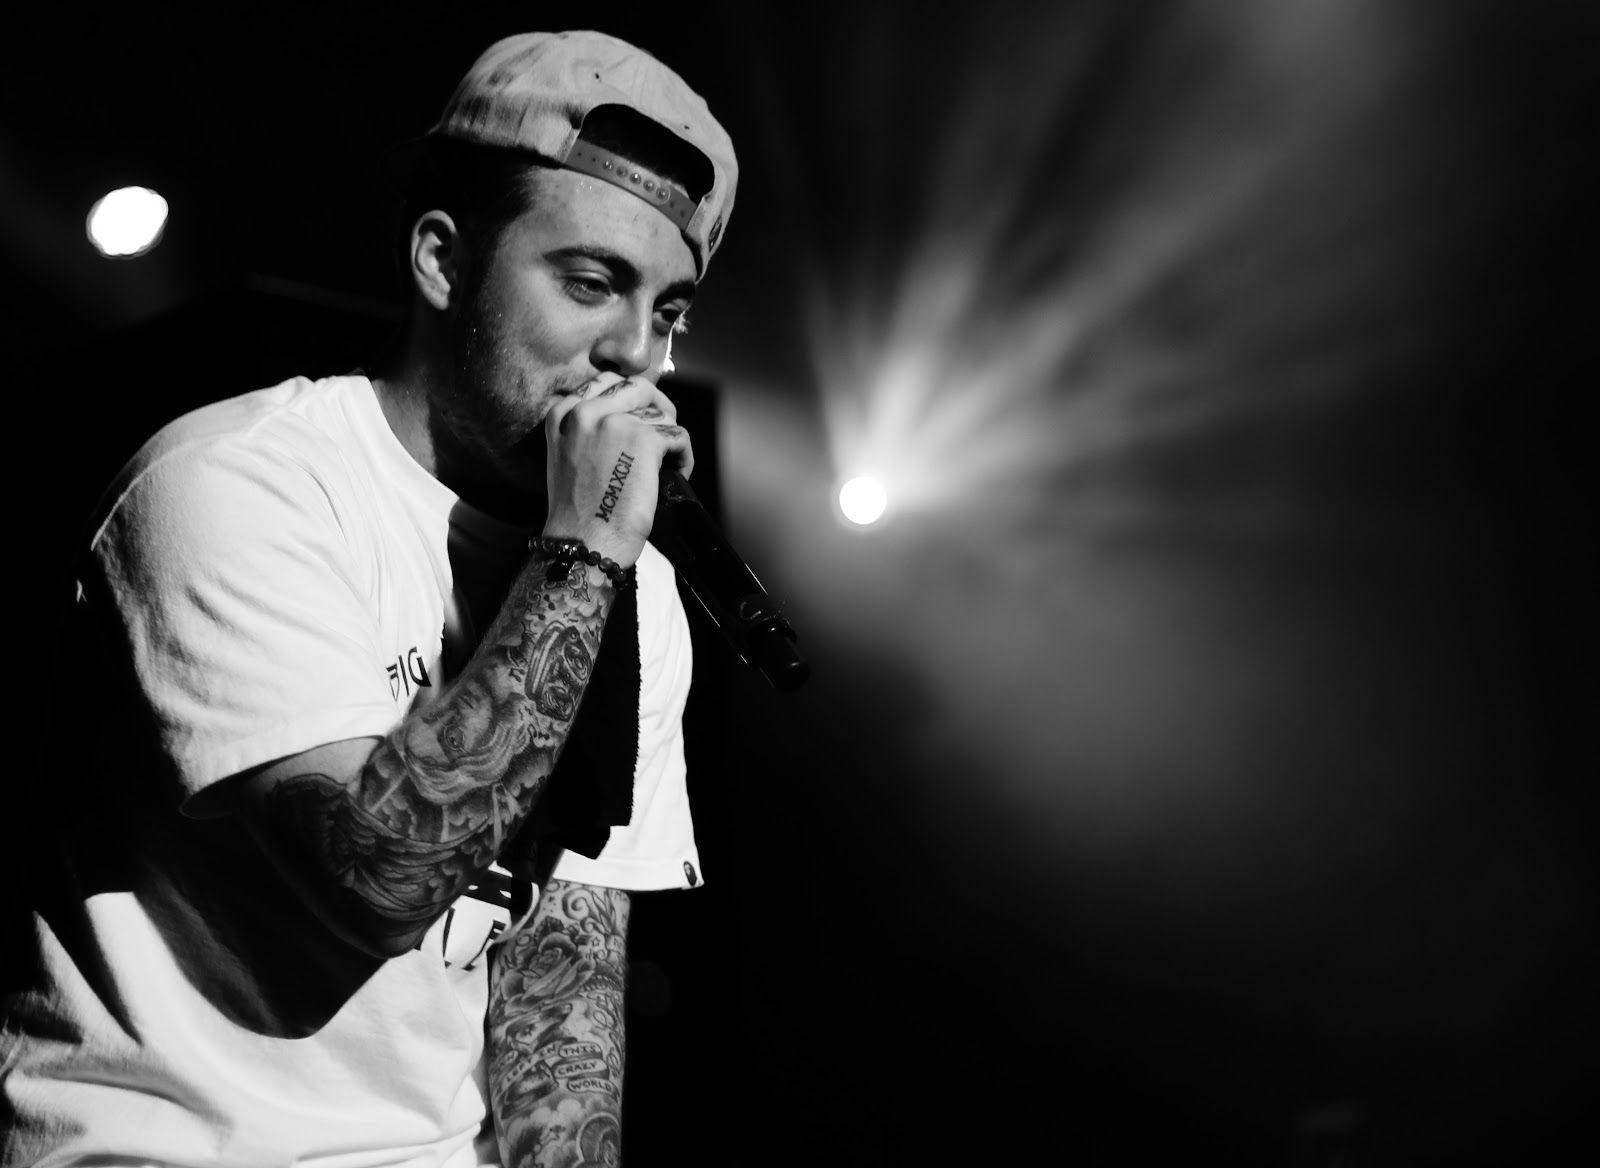 Mac Miller Performing In Black And White Background